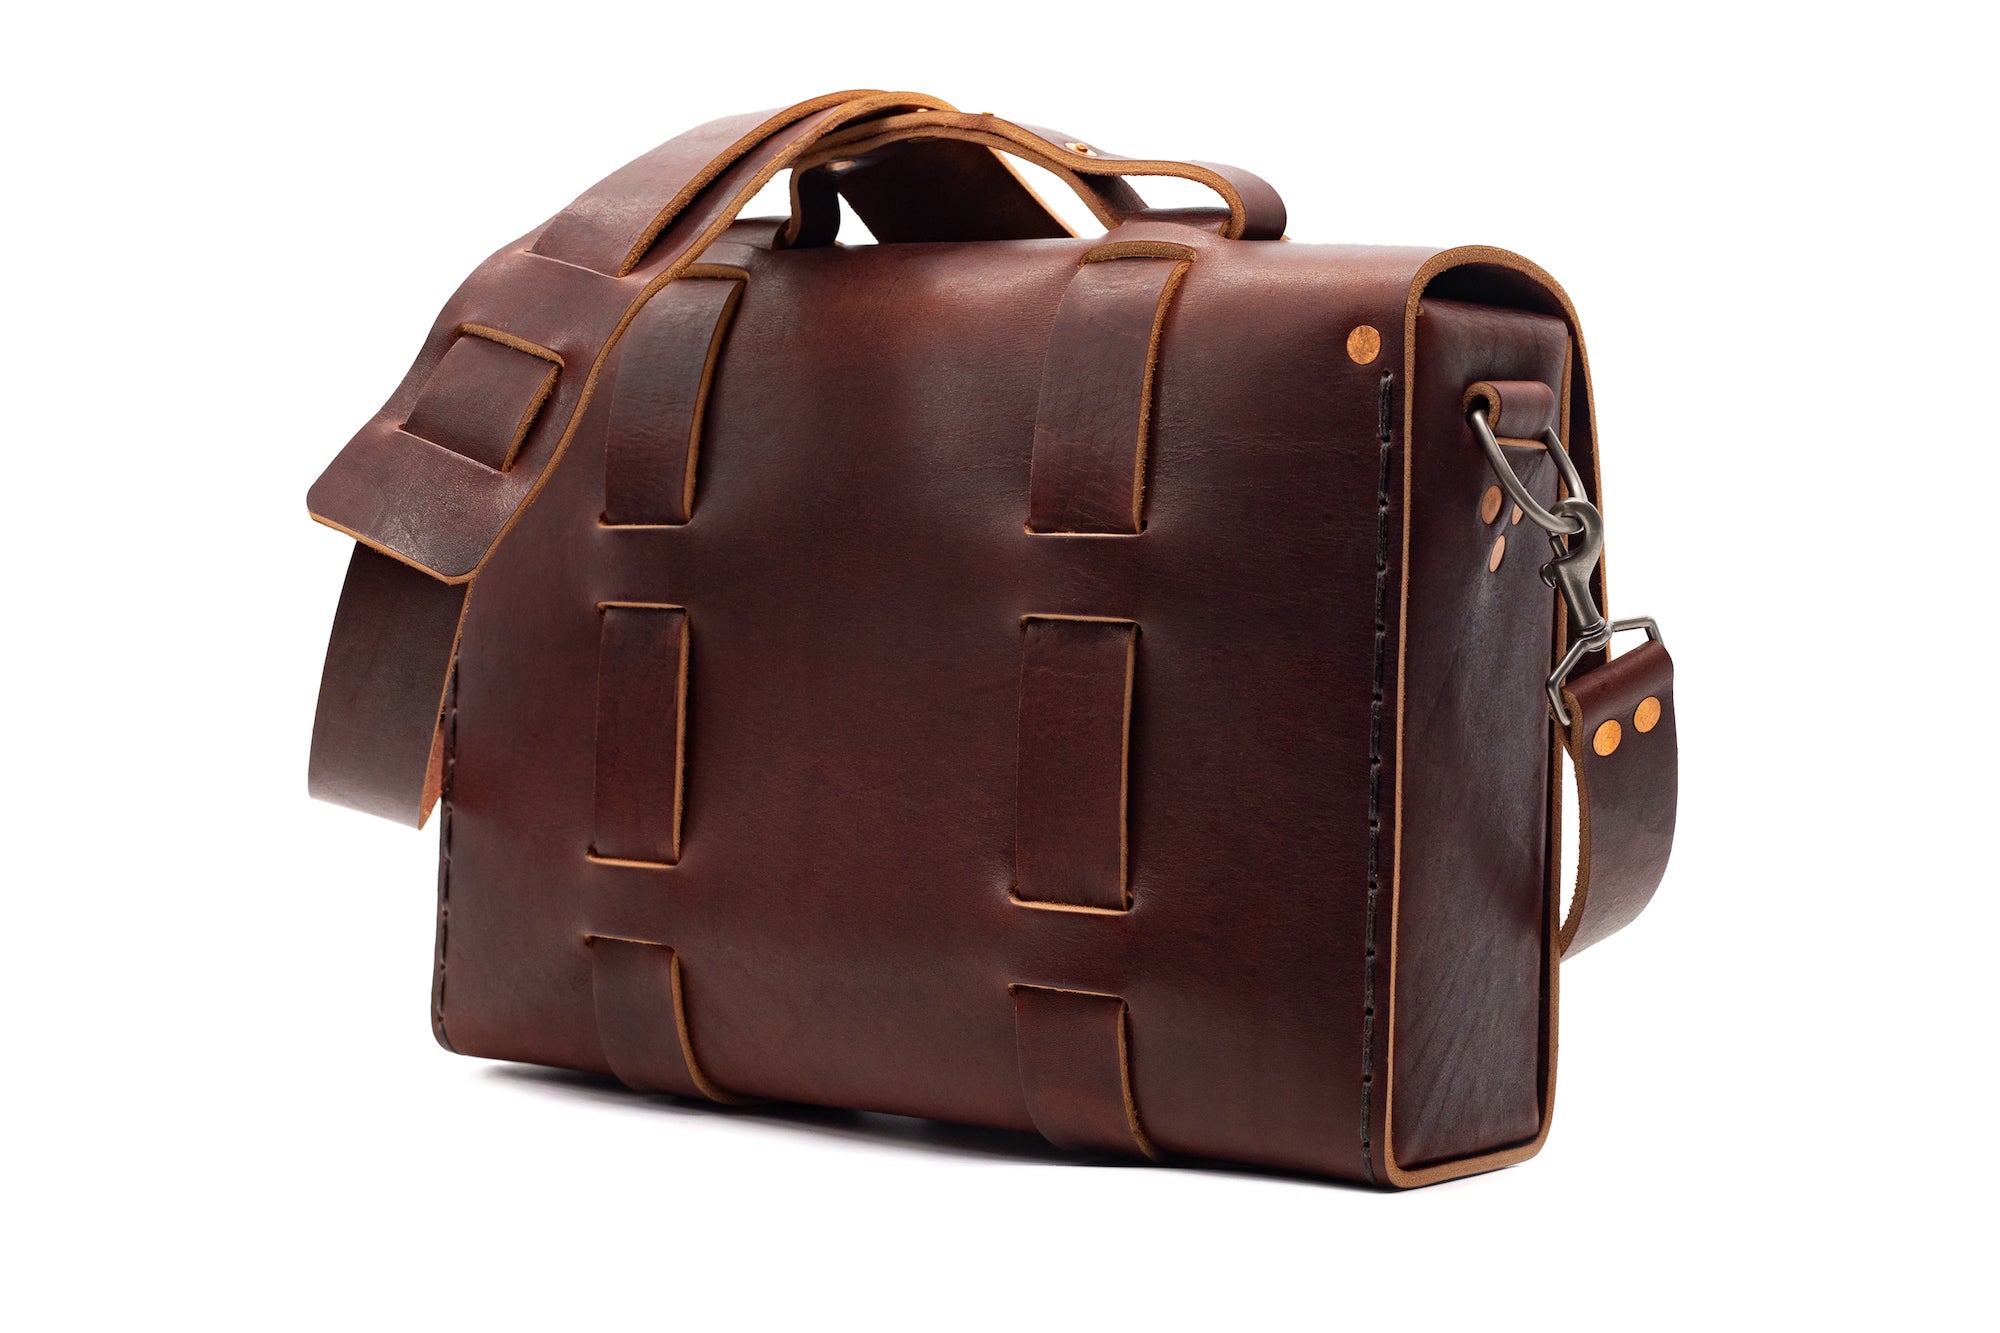 Limited Edition No. 4313 - Minimalist Standard Leather Satchel in Bay St. Brown - ONLY 1 AVAILABLE